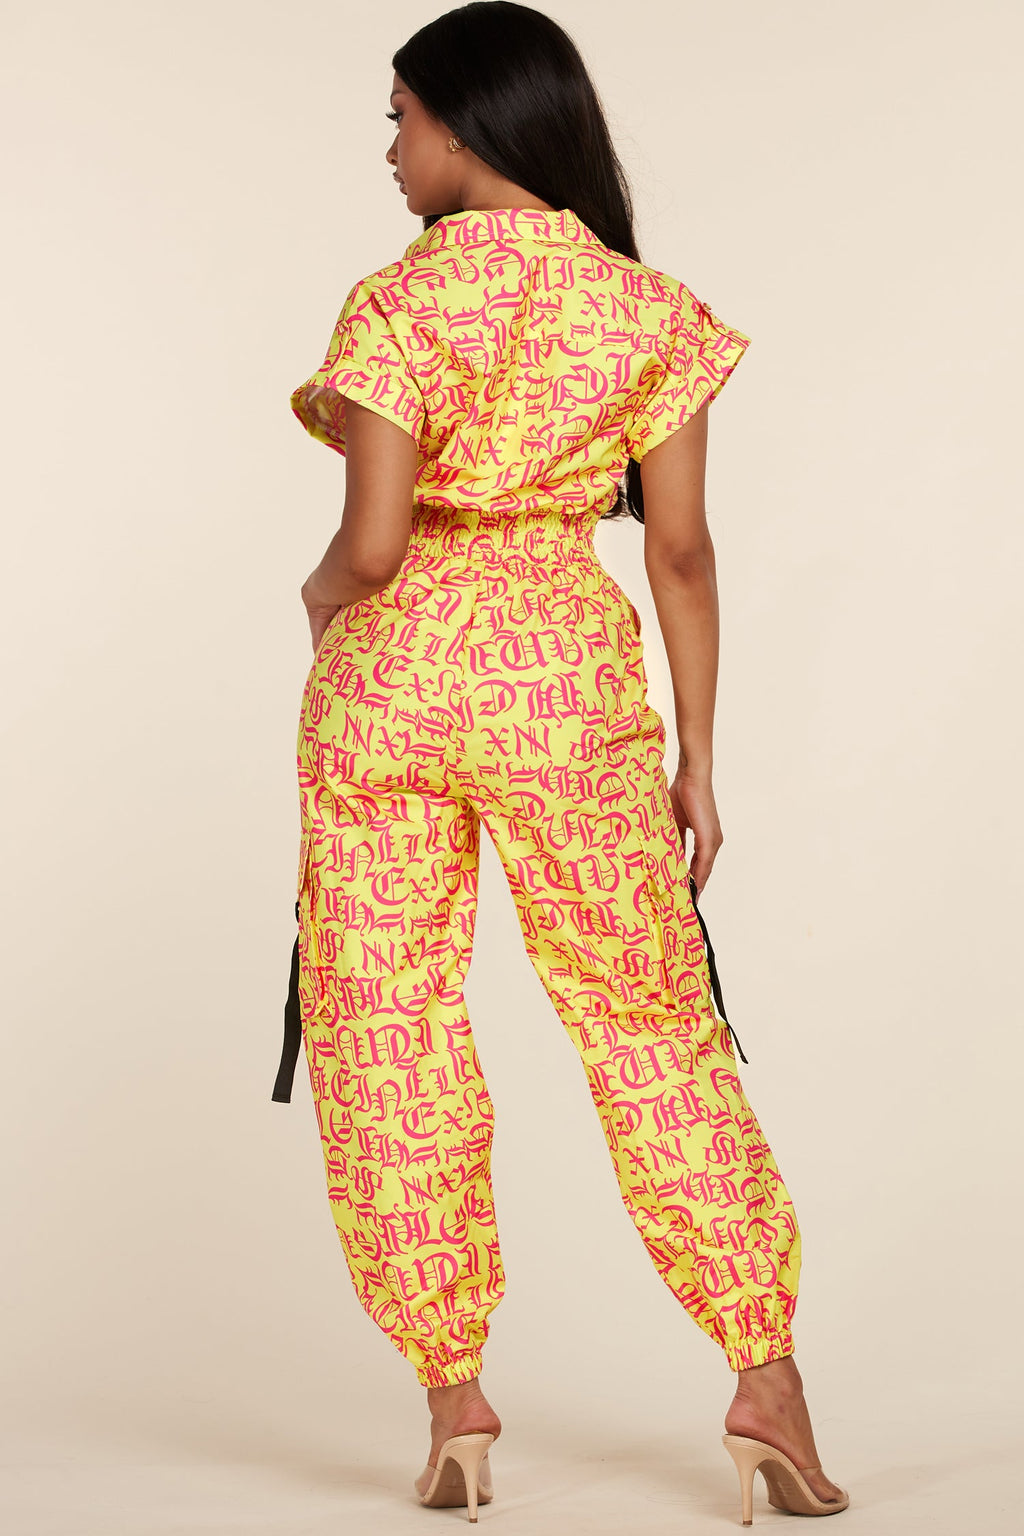 YELLOW JUMPSUIT WITH HOTPINK LETTERS - PRIVILEGE 